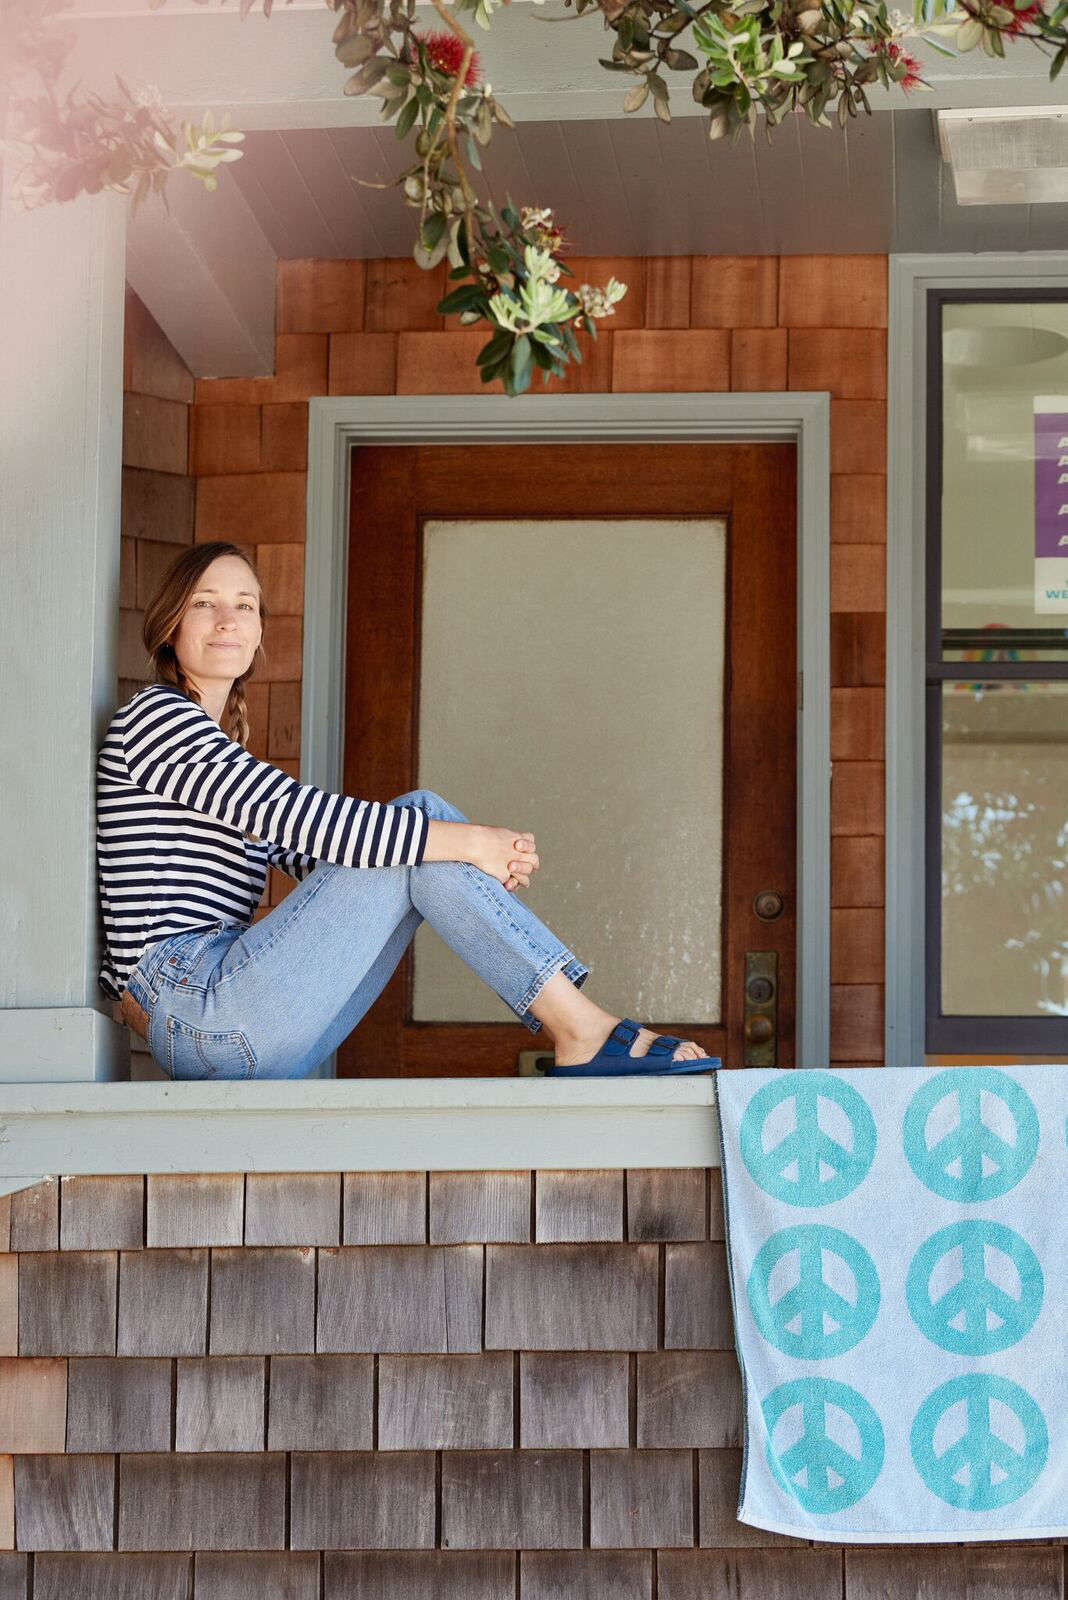 Lena Corwin's Tranquil Home in San Francisco's Outer Sunset